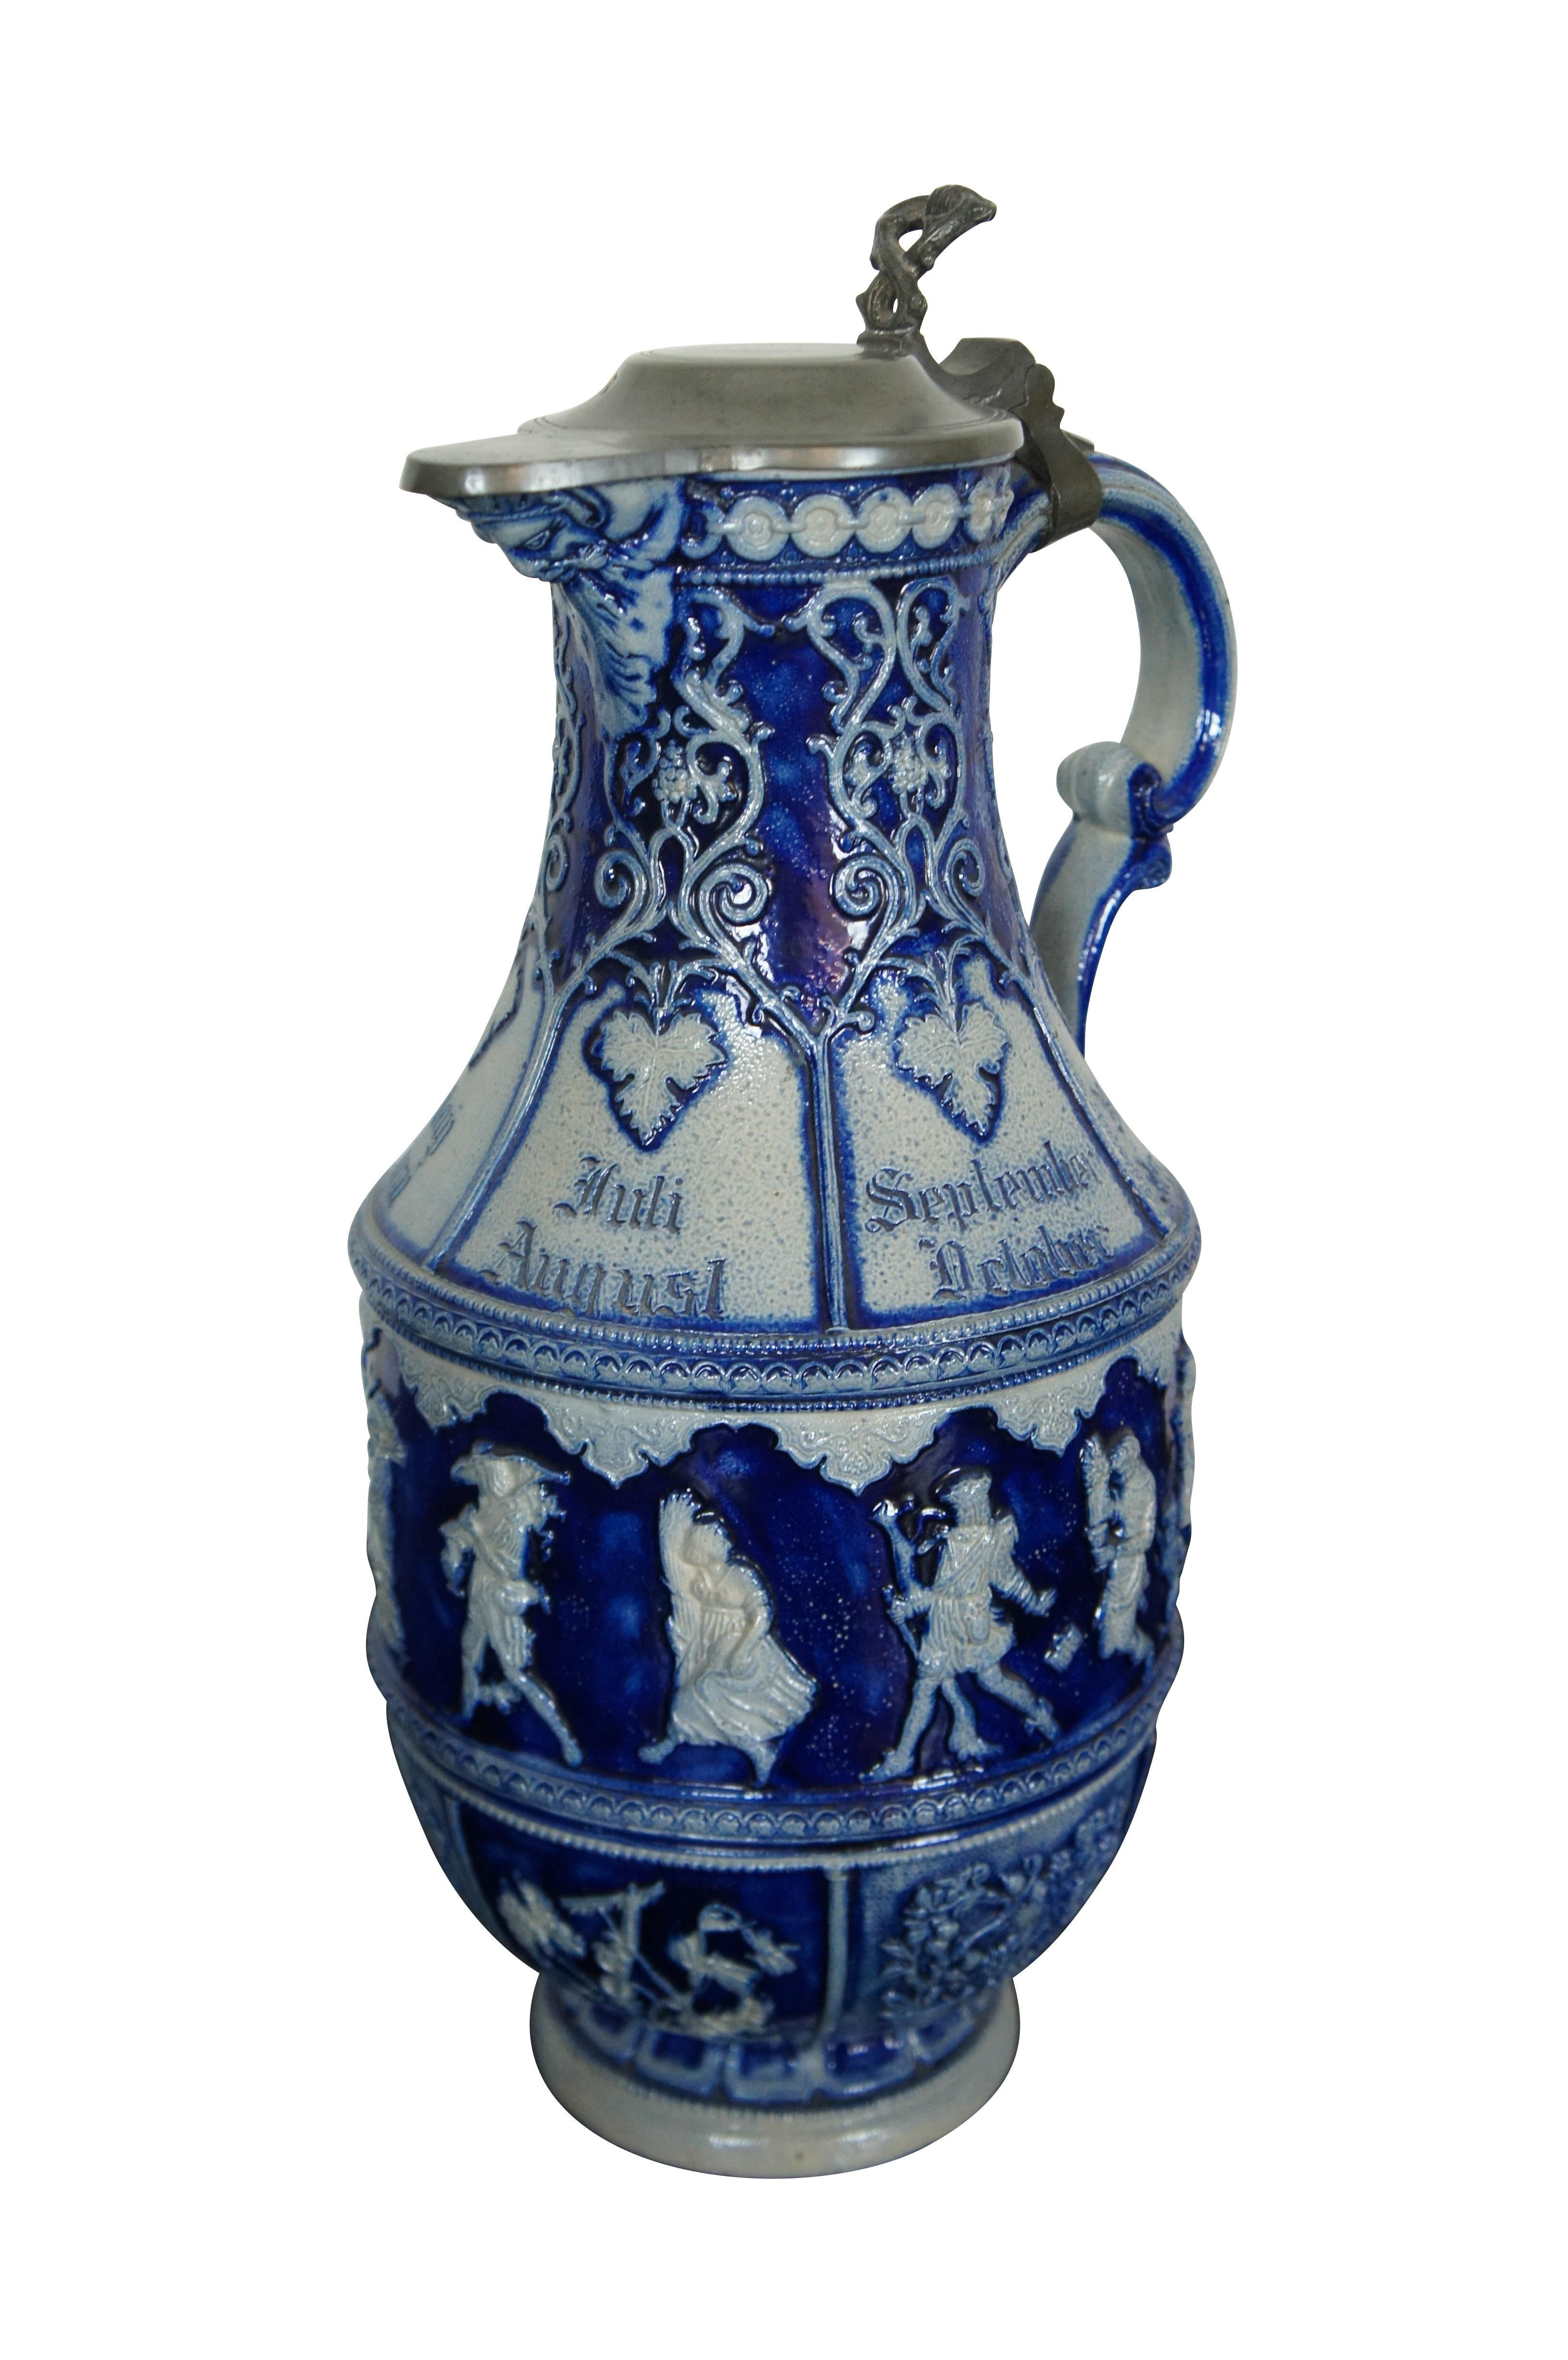 Antique German cobalt blue salt glaze pewter lidded stoneware pitcher / jug / ewer featuring the face of Dionysus or Bacchus - God of wine - on the spout surrounded by grapevines / grapes / leaves, the months of the year and dancing